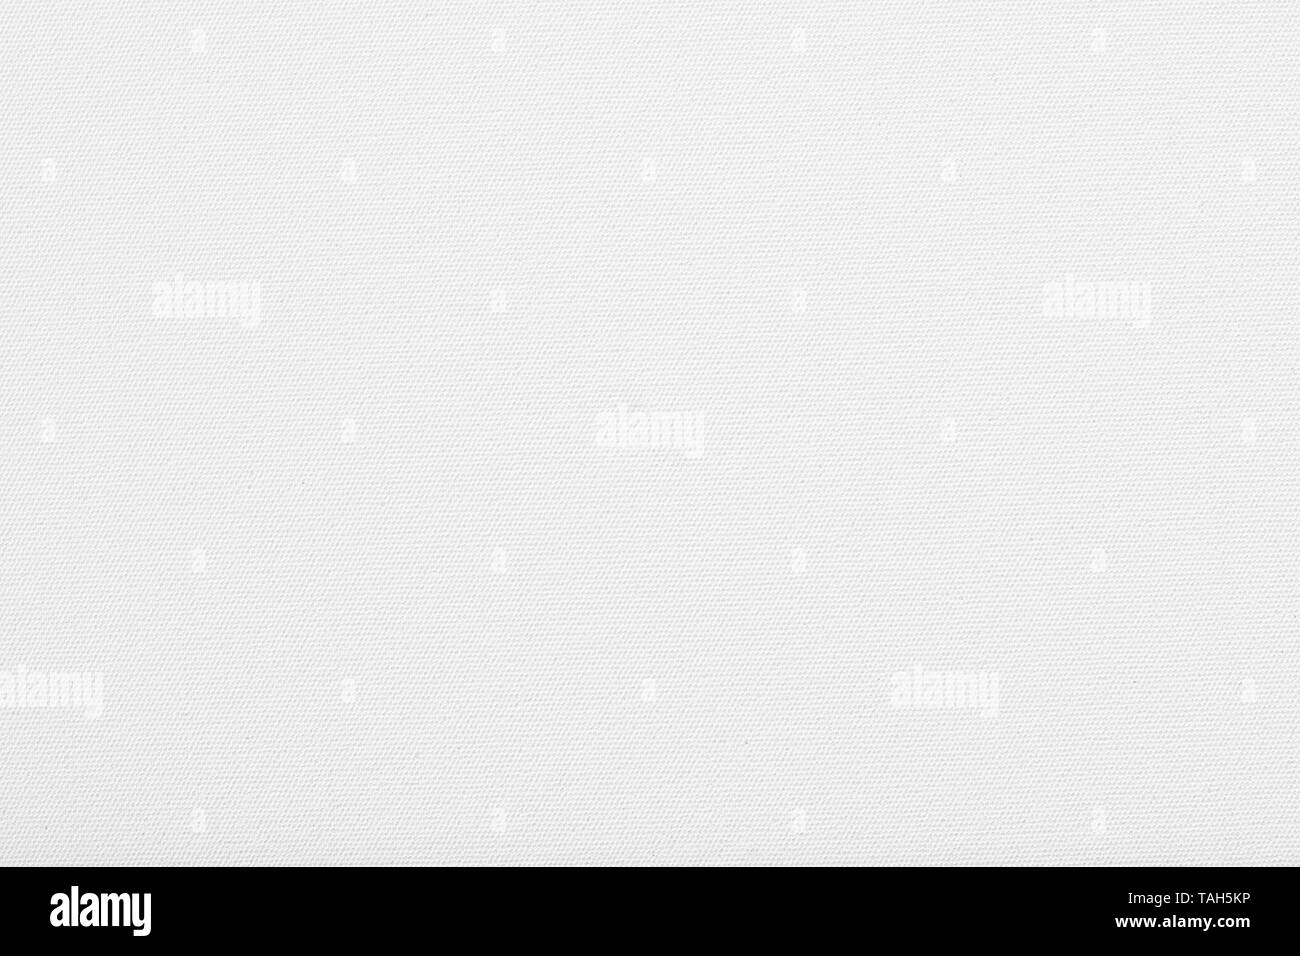 White canvas fabric texture background from canvas panel fabric board for draw or paint picture use us design backdrop or overlay design Stock Photo